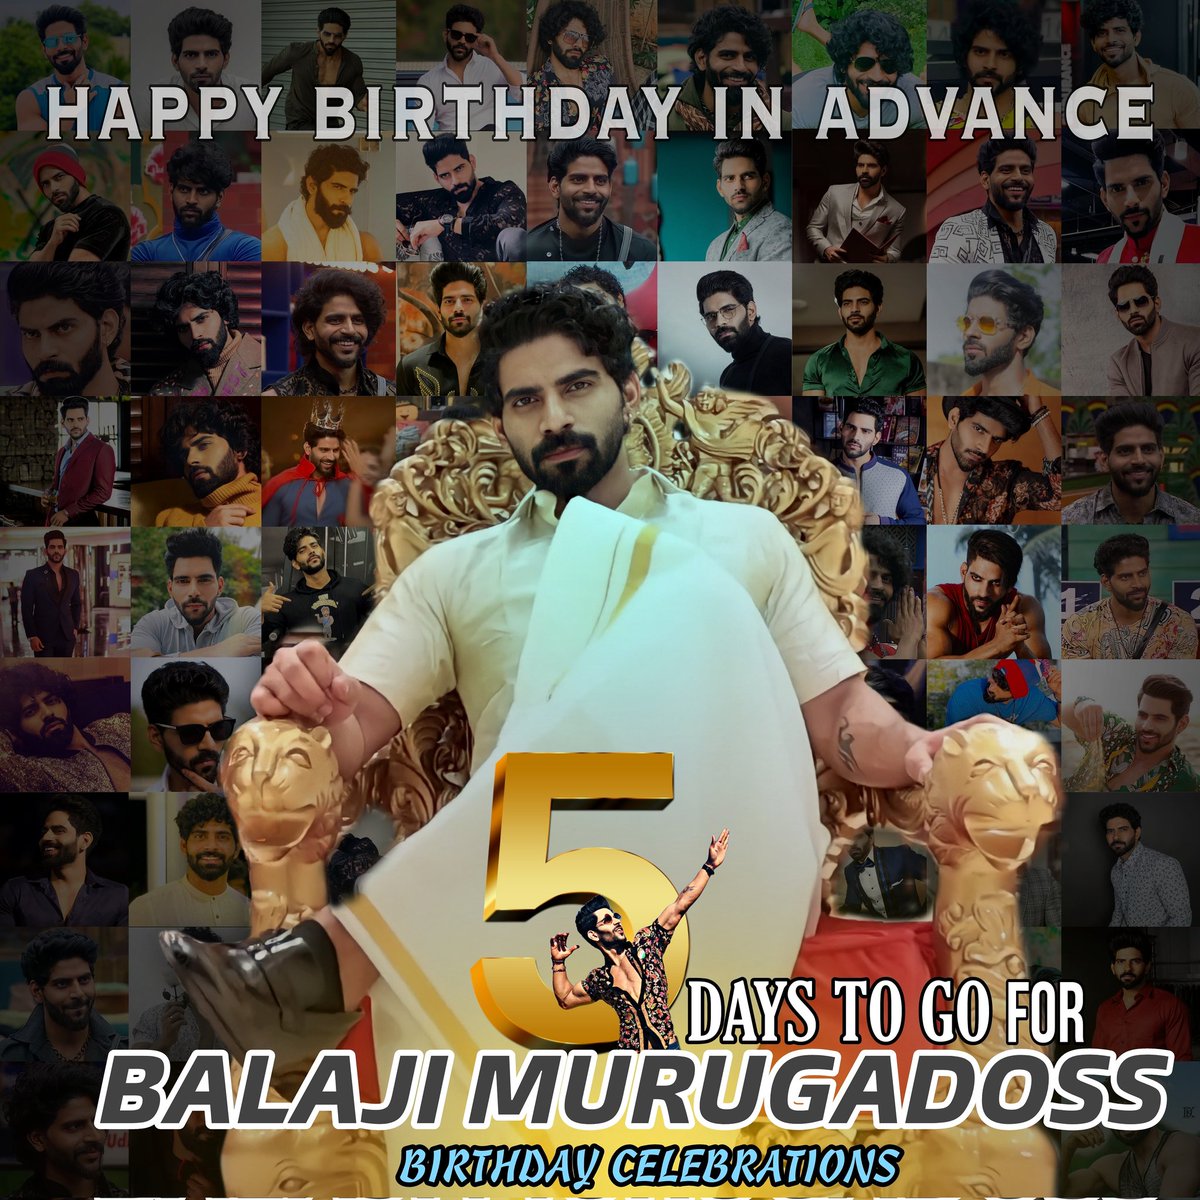 Advance happy birthday bala 🥳
You have been and always be the inspiration to me and many people out there!! Thank you for always supporting your each and every follower!!We all love you Thangam💞
#BalajiMurugadoss
#AdvanceHBDBala